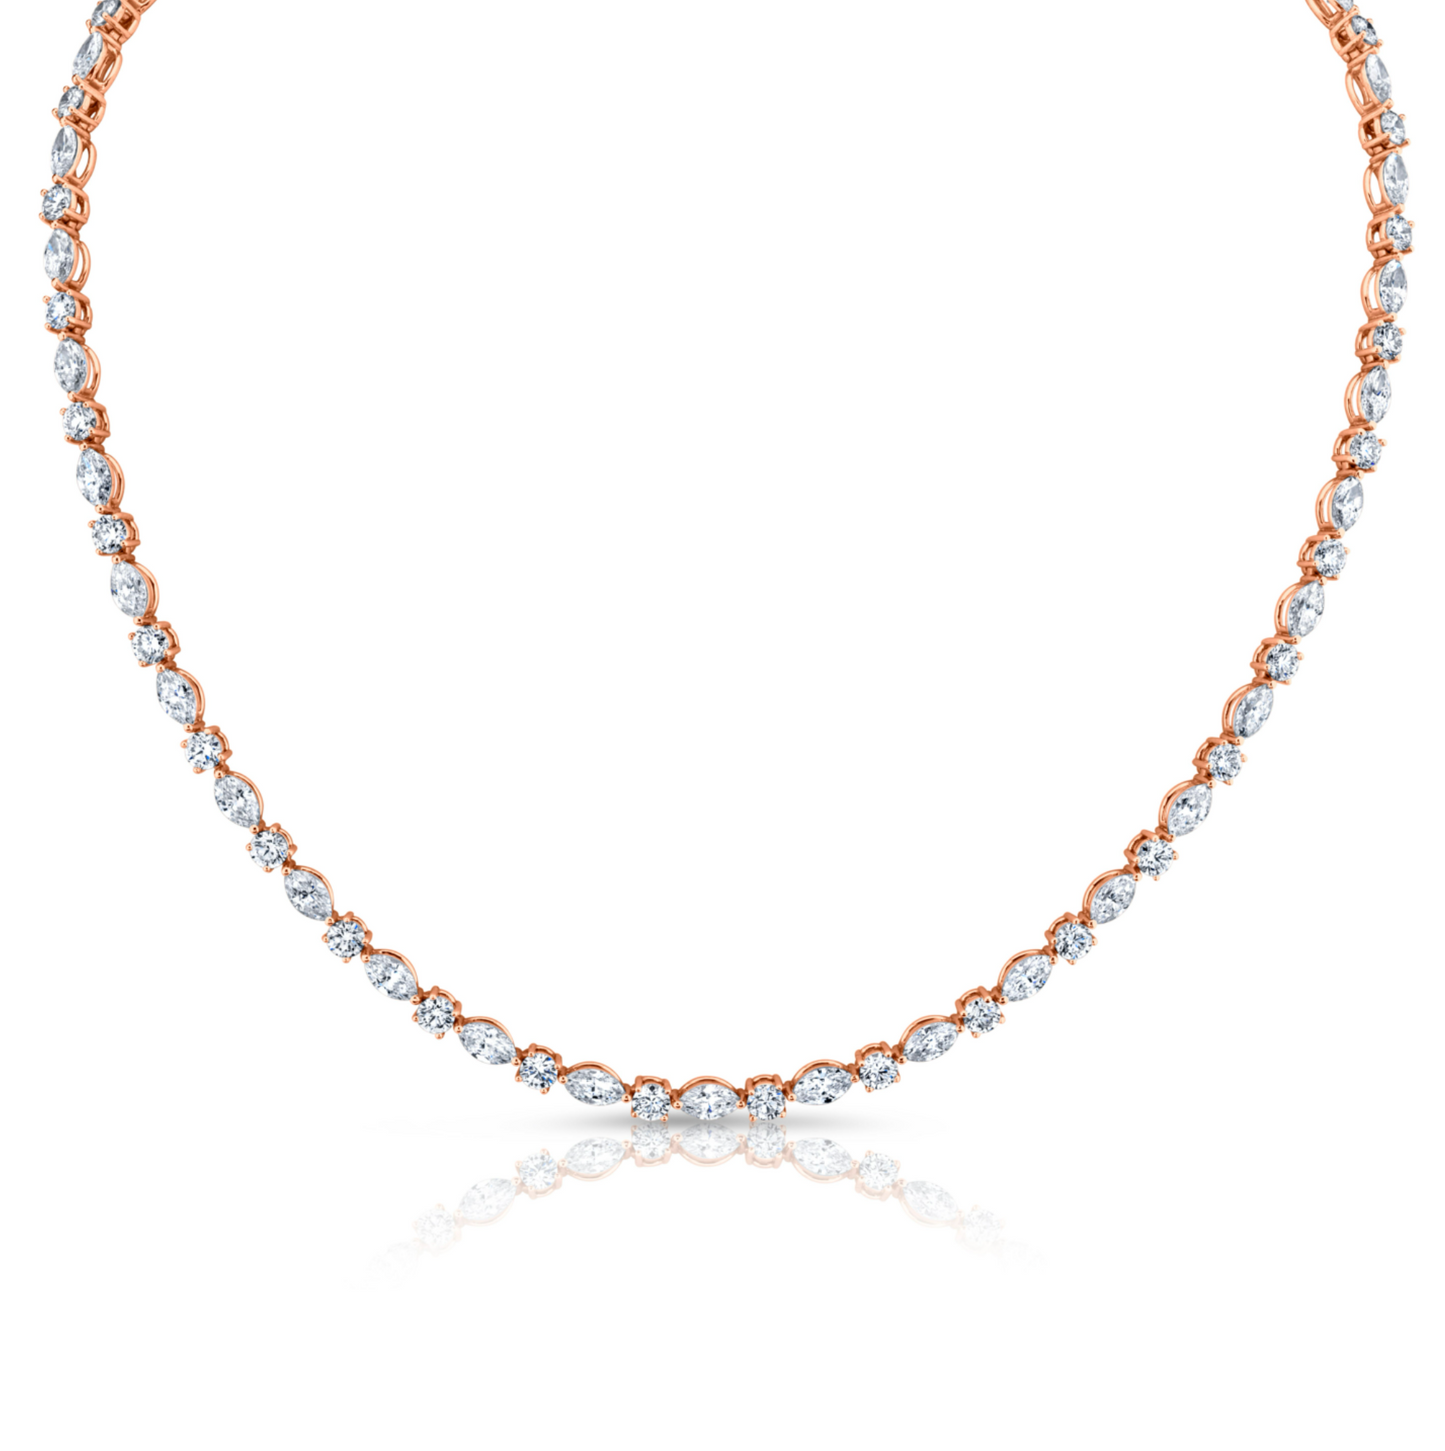 14.96 Carat Round and Marquise-Cut Diamond Necklace